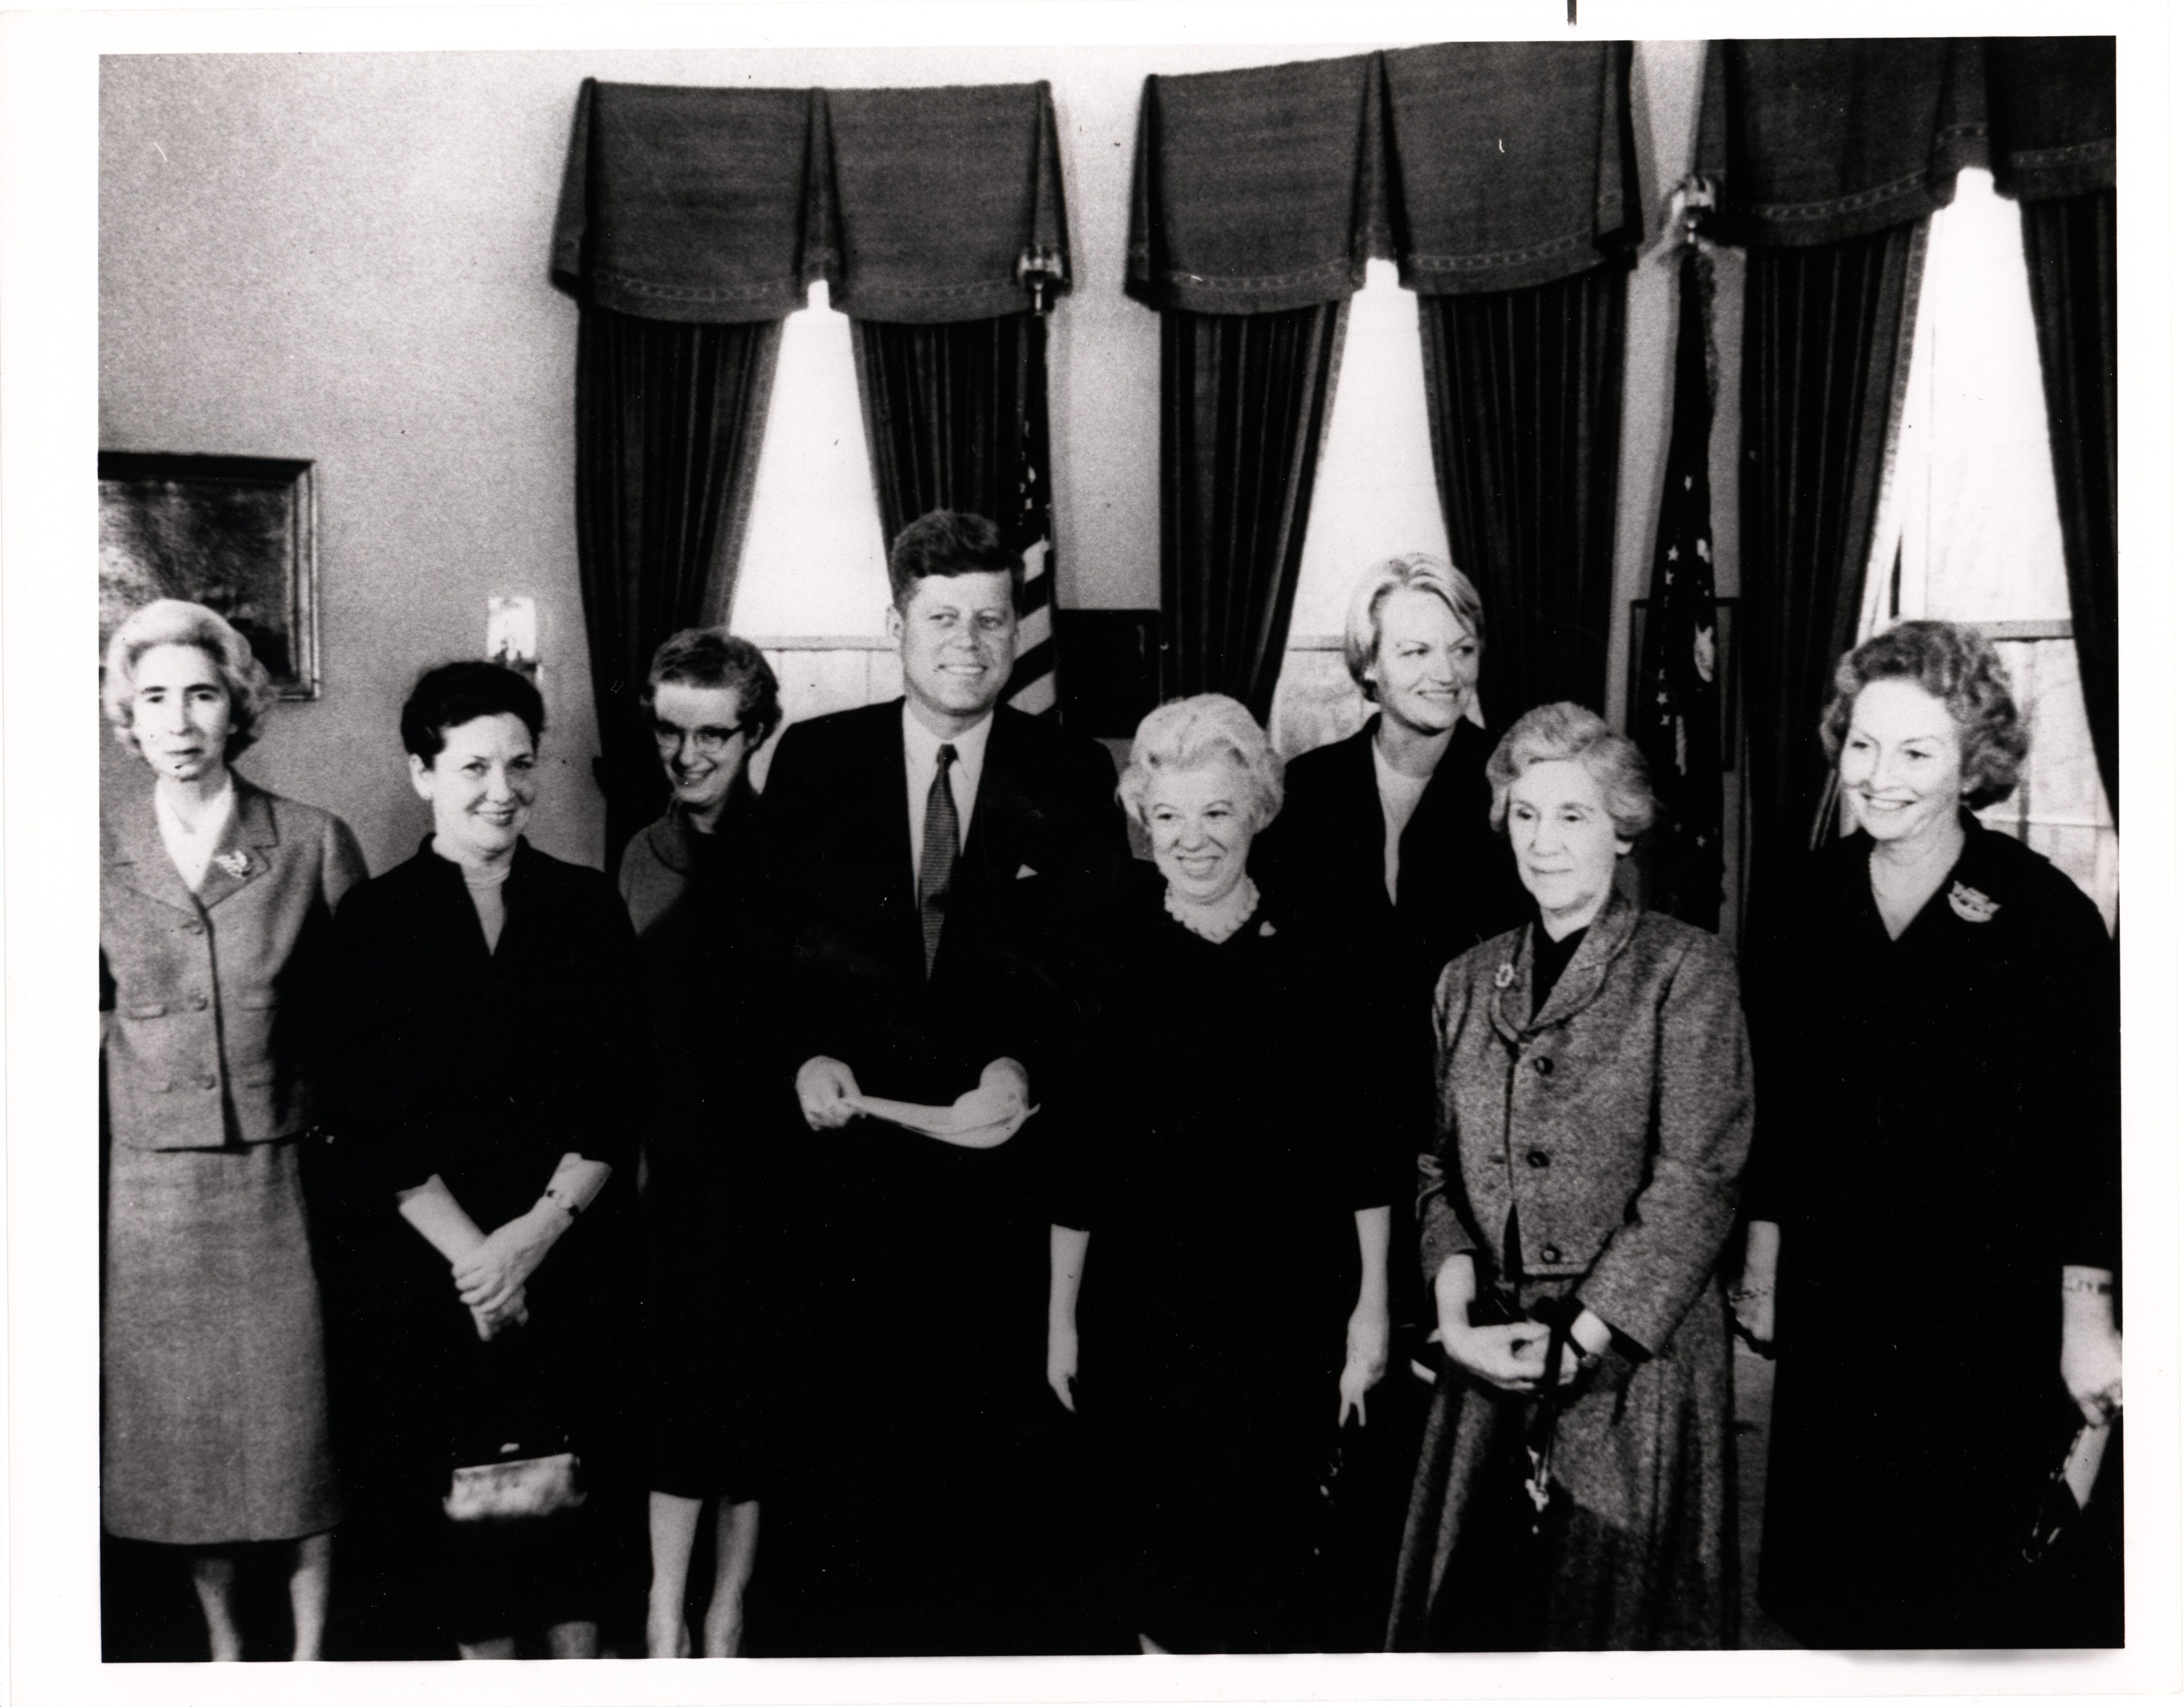 A group of women receive an award from President John F. Kennedy in the White House.